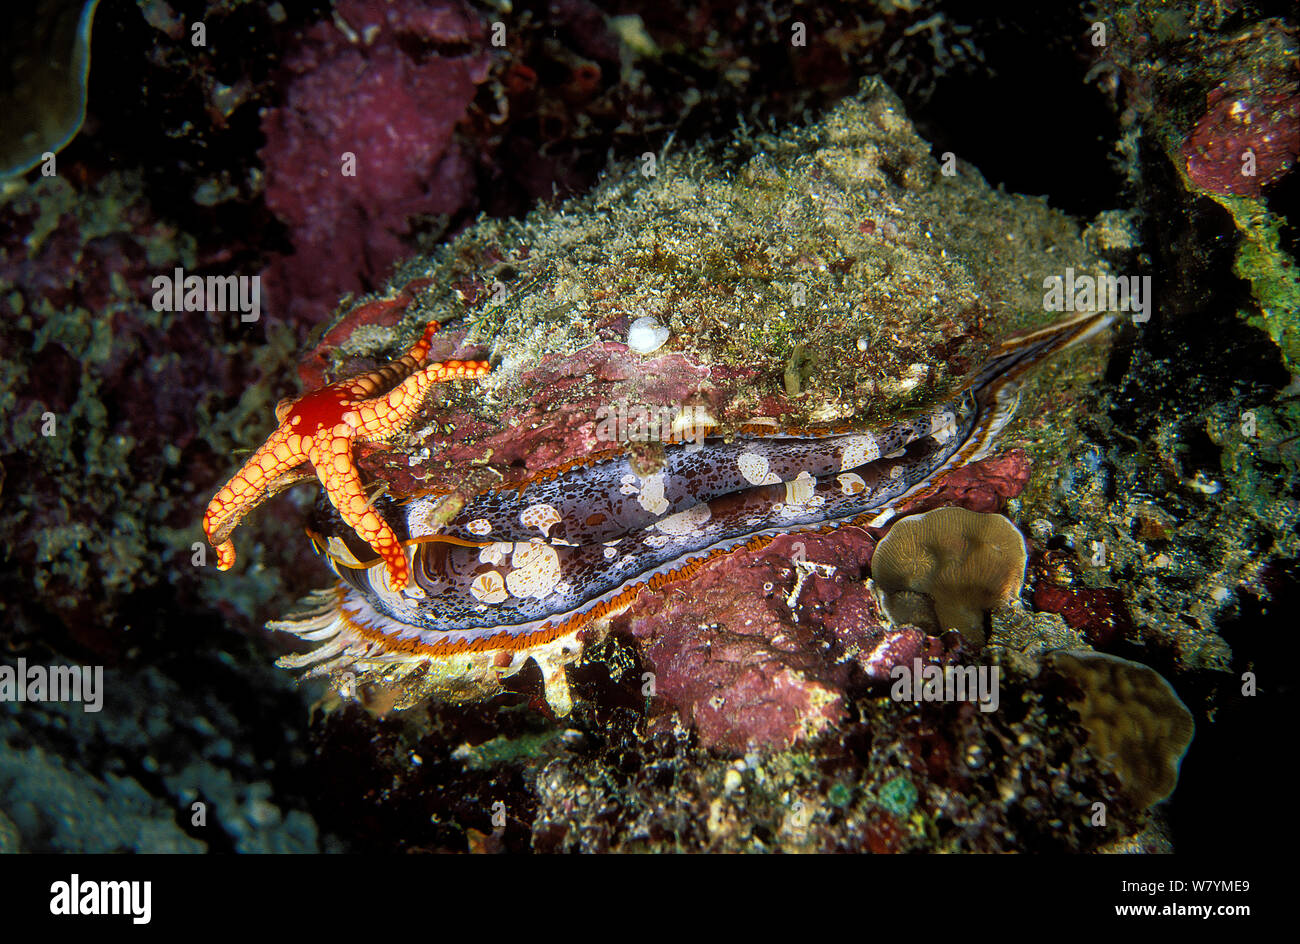 Necklace starfish (Fromia monilis) on variable thorny oyster (Spondylus varius), Maldives, Indian Ocean. This starfish is a predator of oysters. Stock Photo